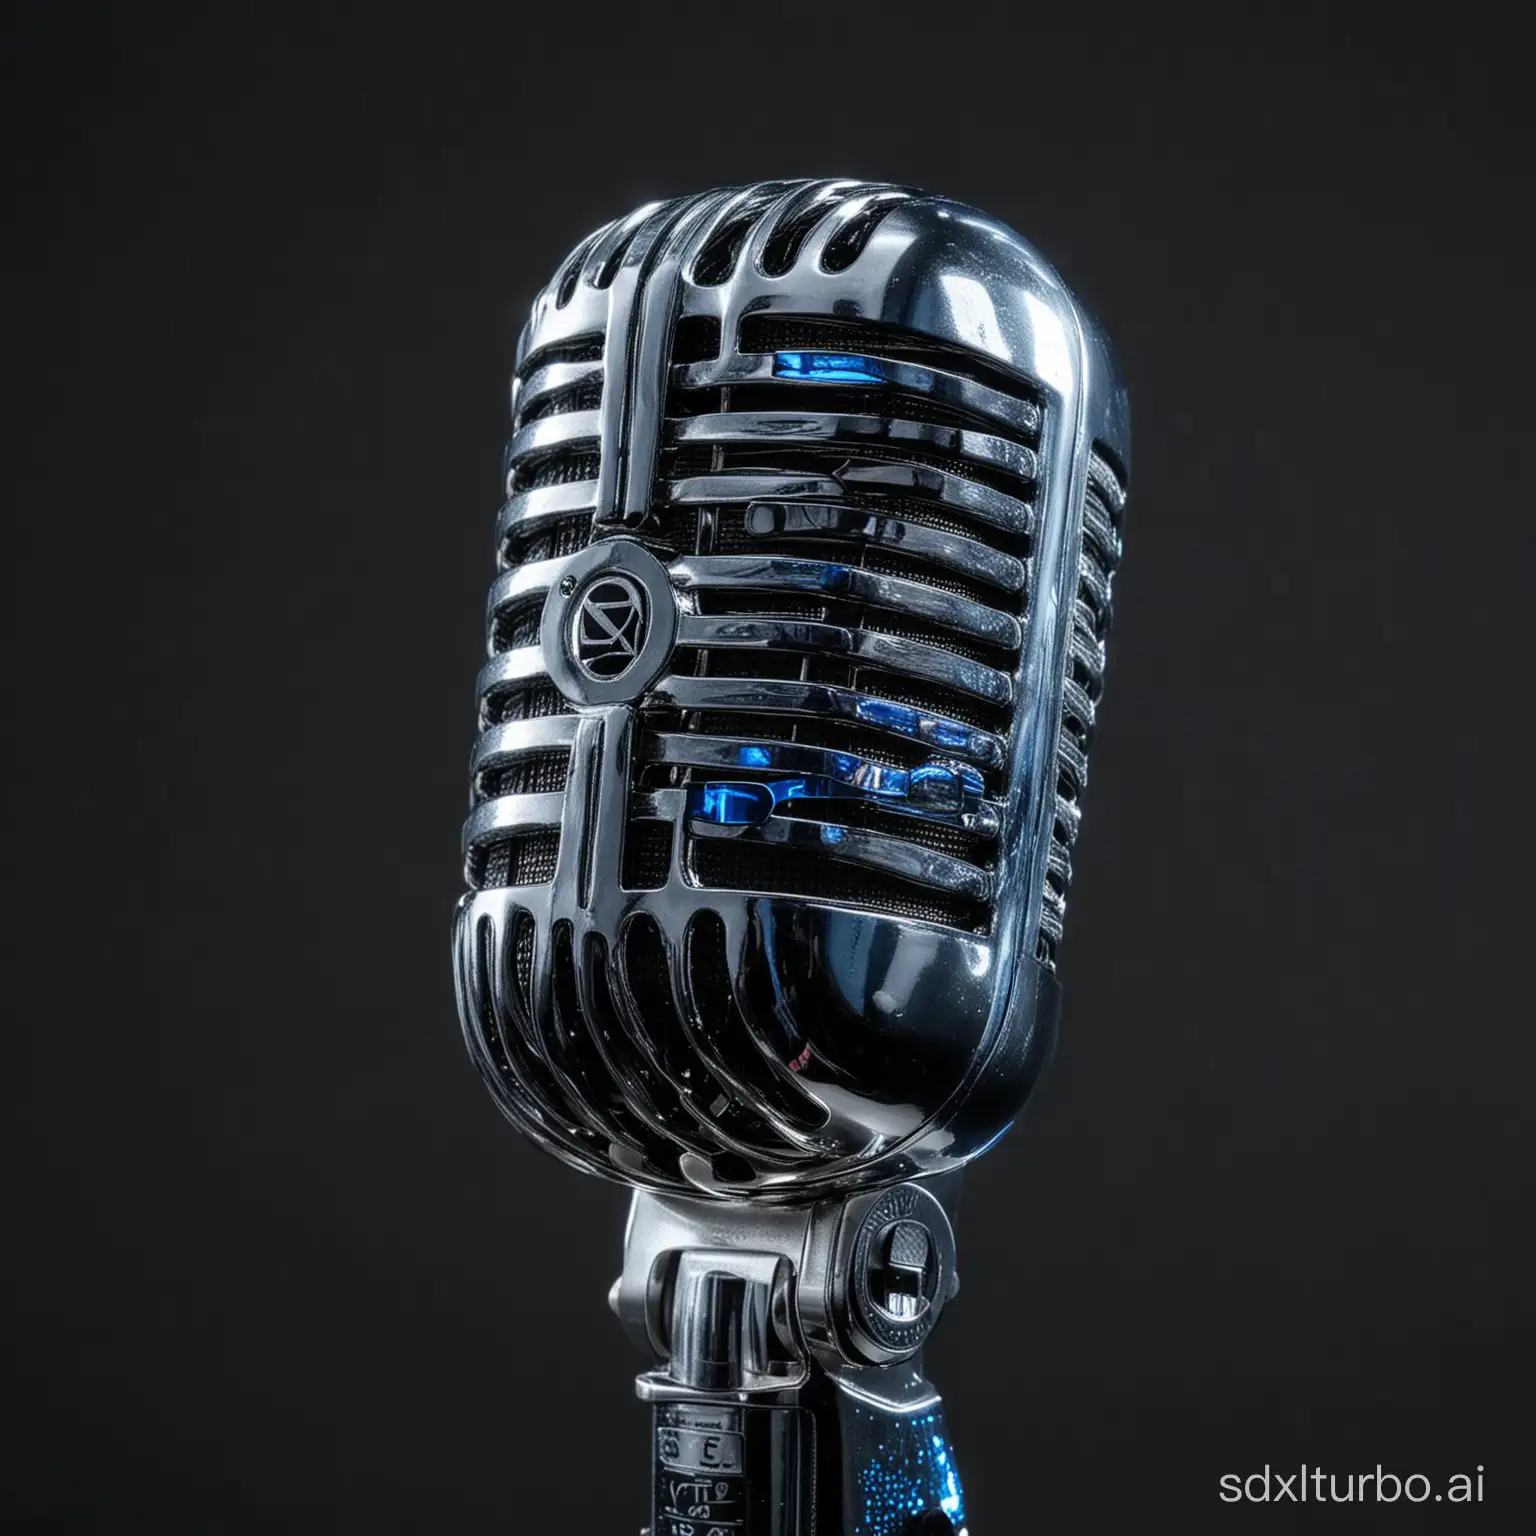 Elegant-Silver-Singer-Microphone-with-Blue-Reflection-on-Black-Background